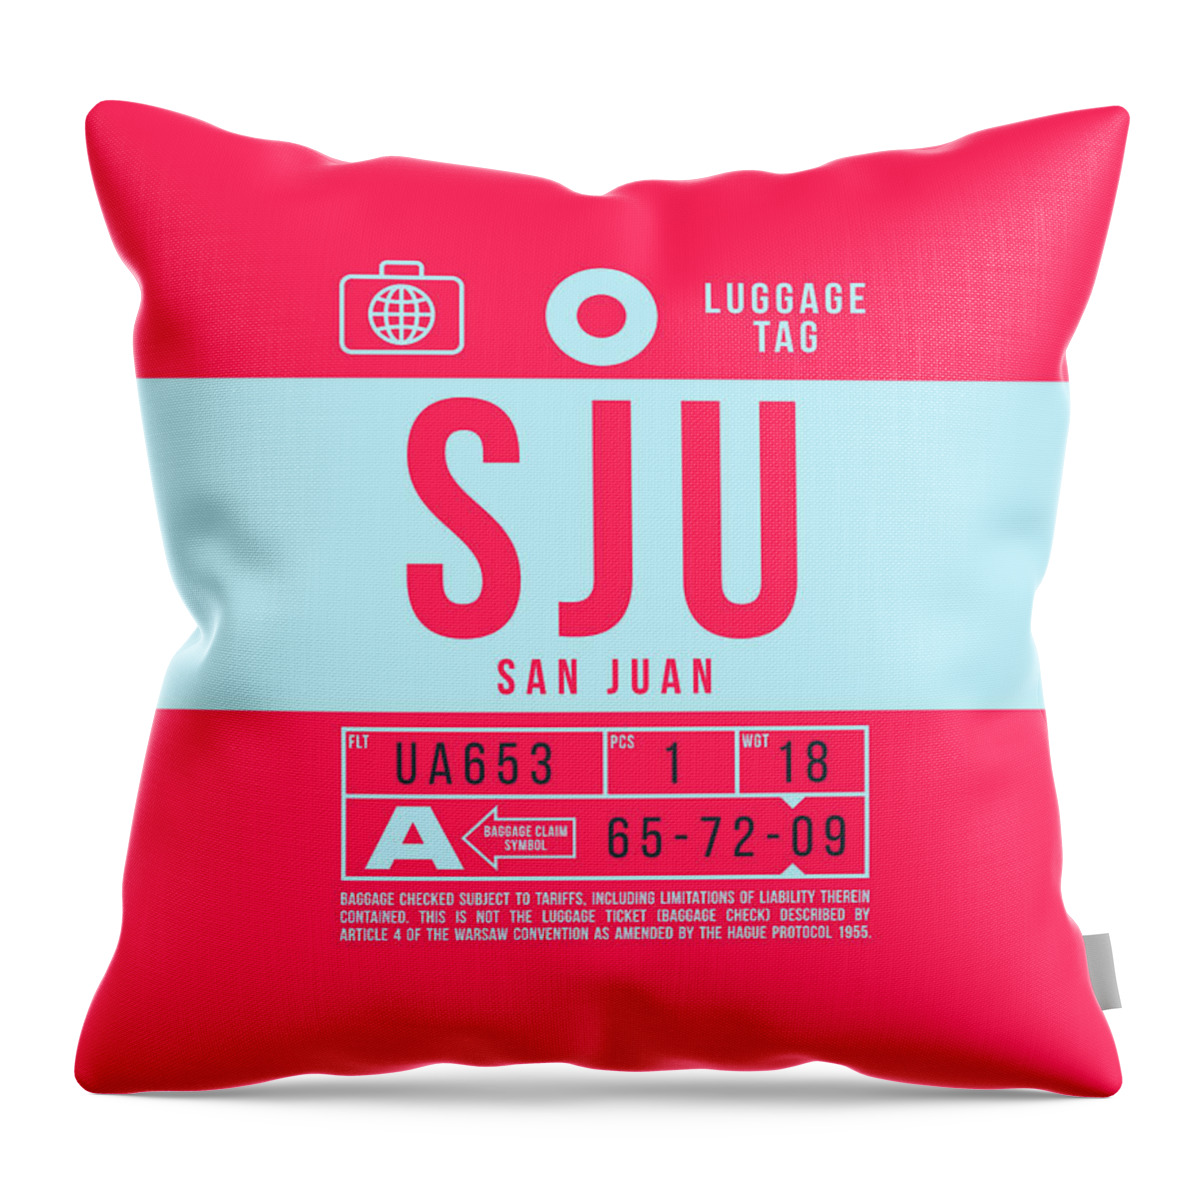 Airline Throw Pillow featuring the digital art Luggage Tag B - SJU San Juan Puerto Rico by Organic Synthesis